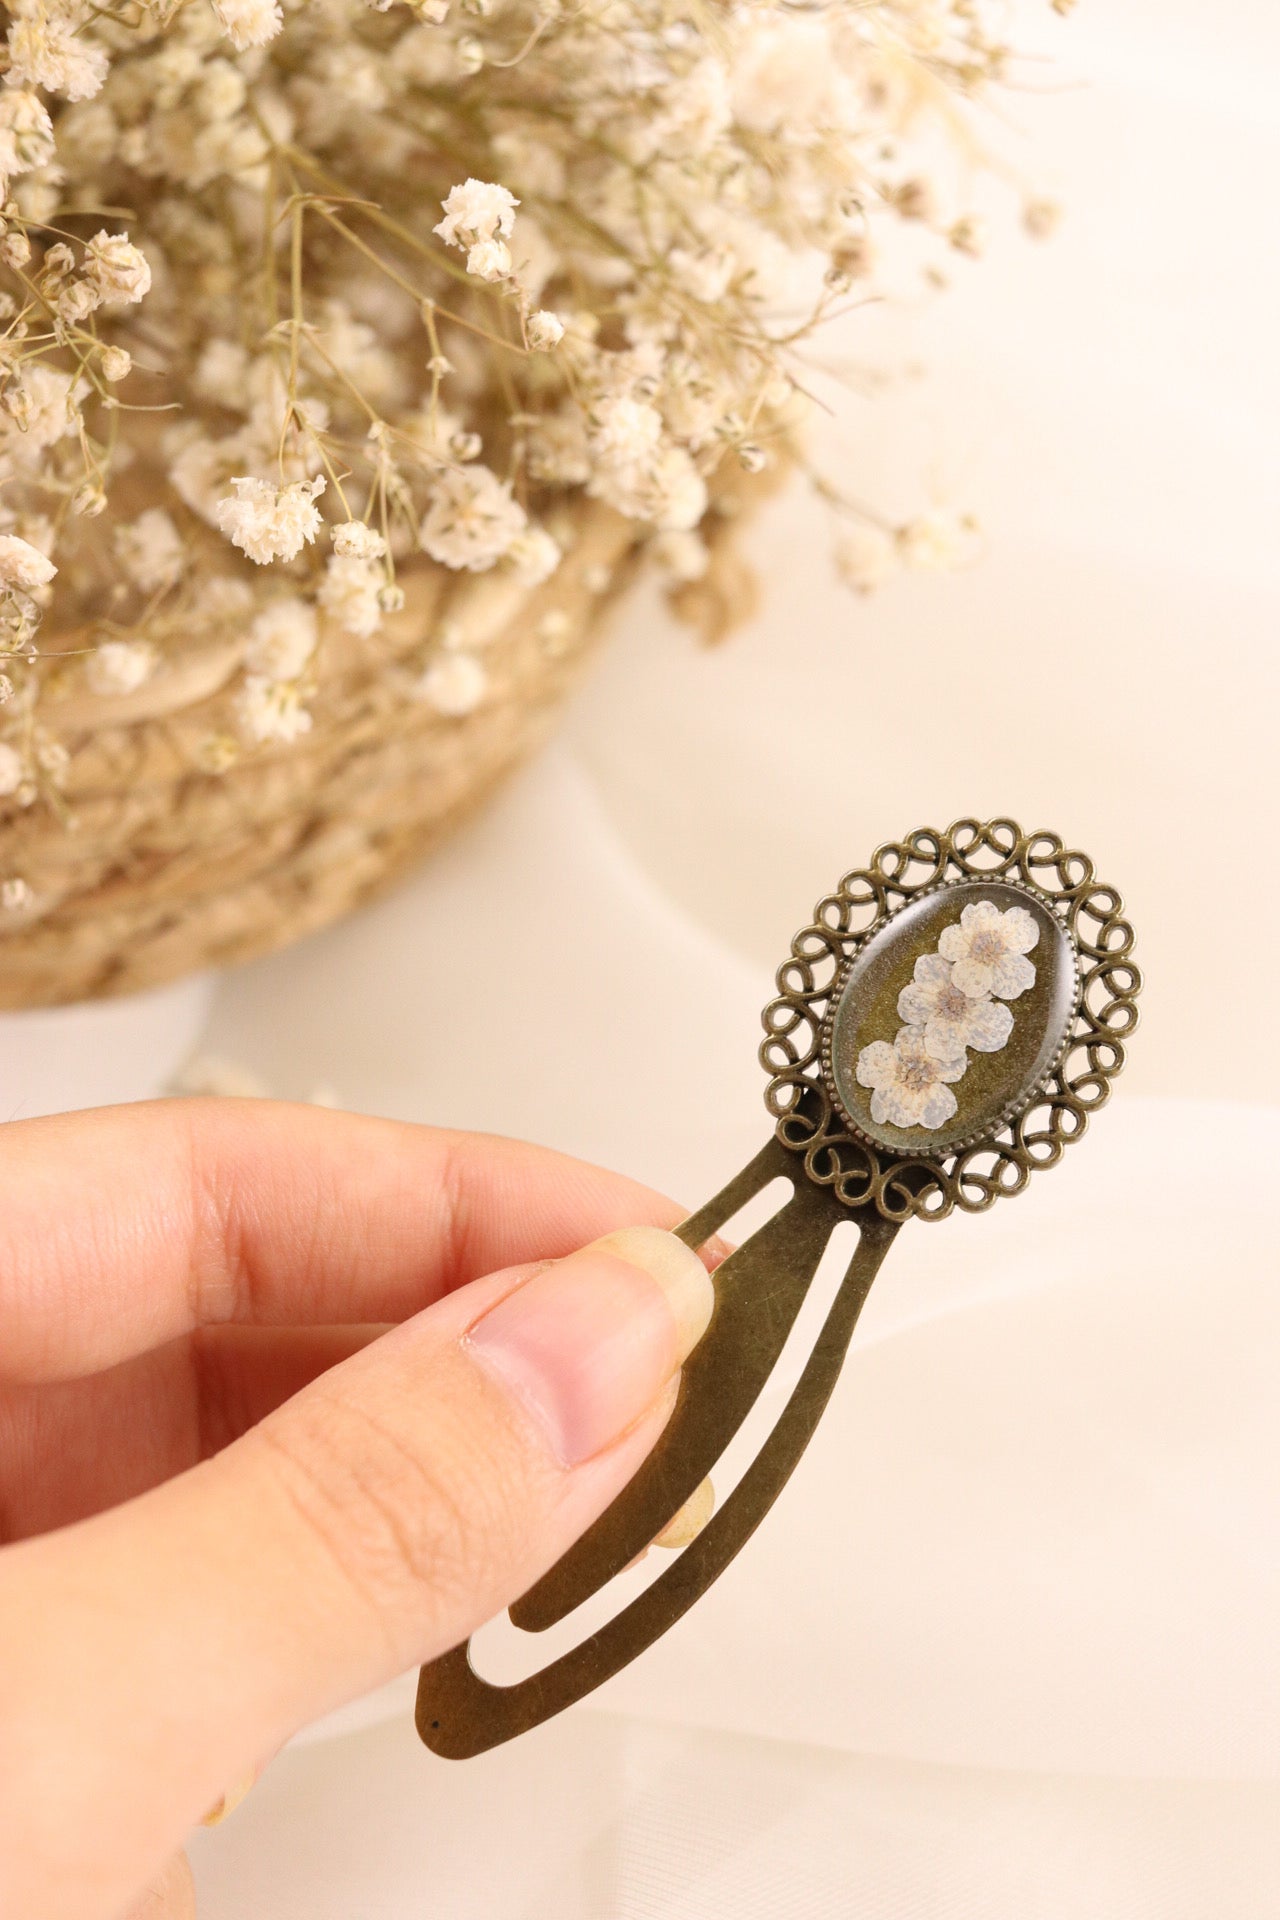 Vintage Bronze Bookmark Clip With White Flowers